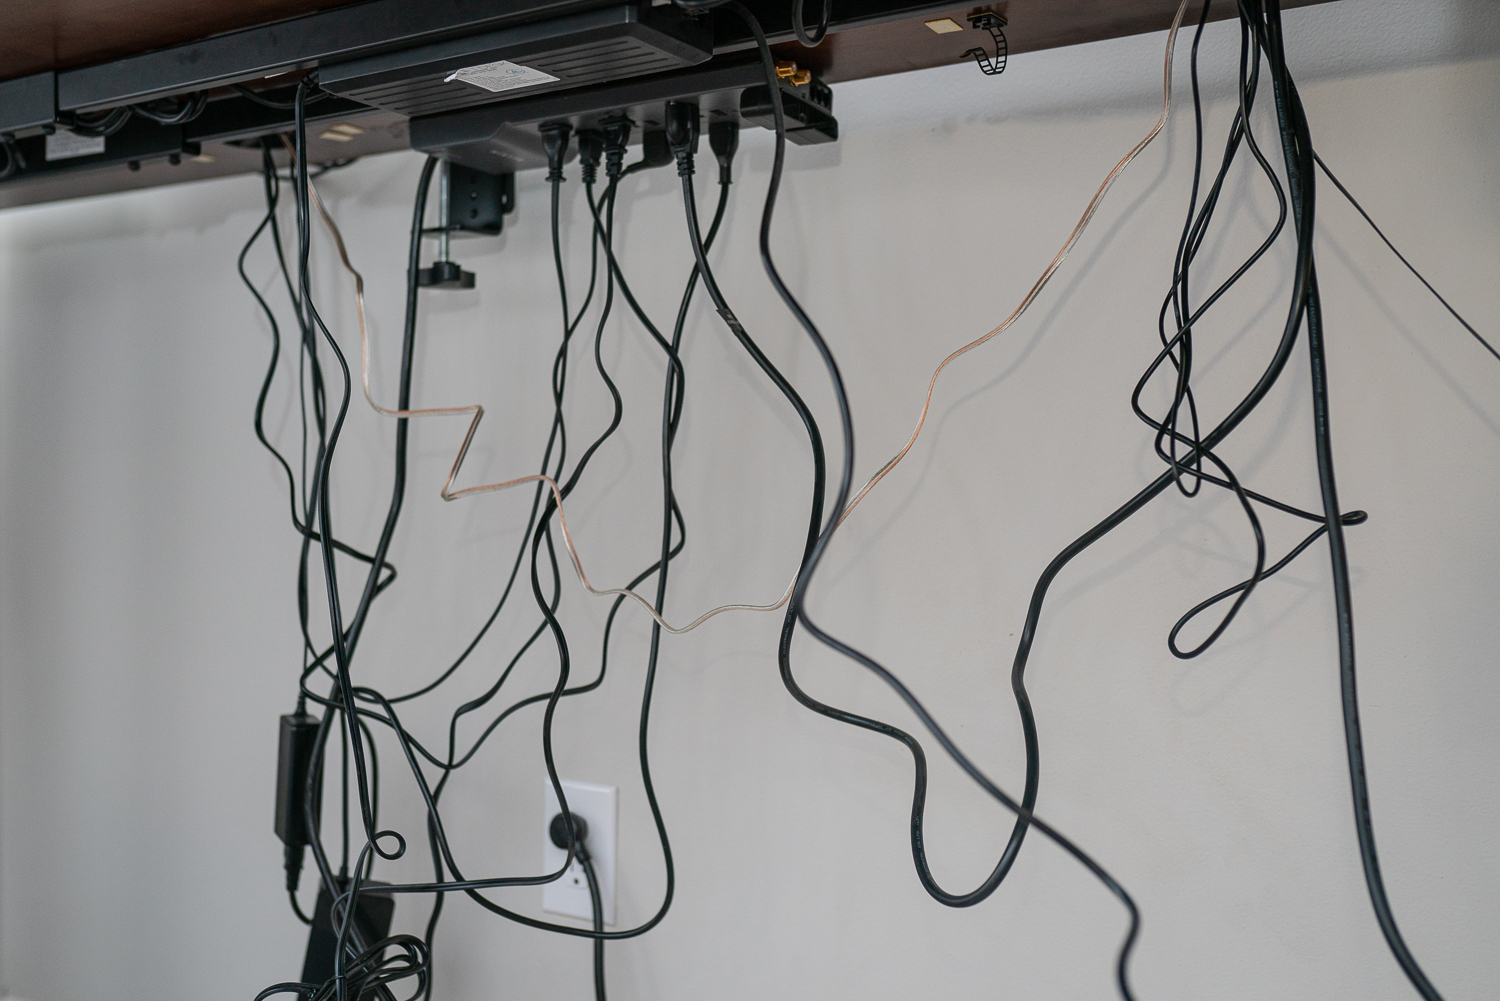 How to Organize Wires Behind Desk? Tools &Tricks